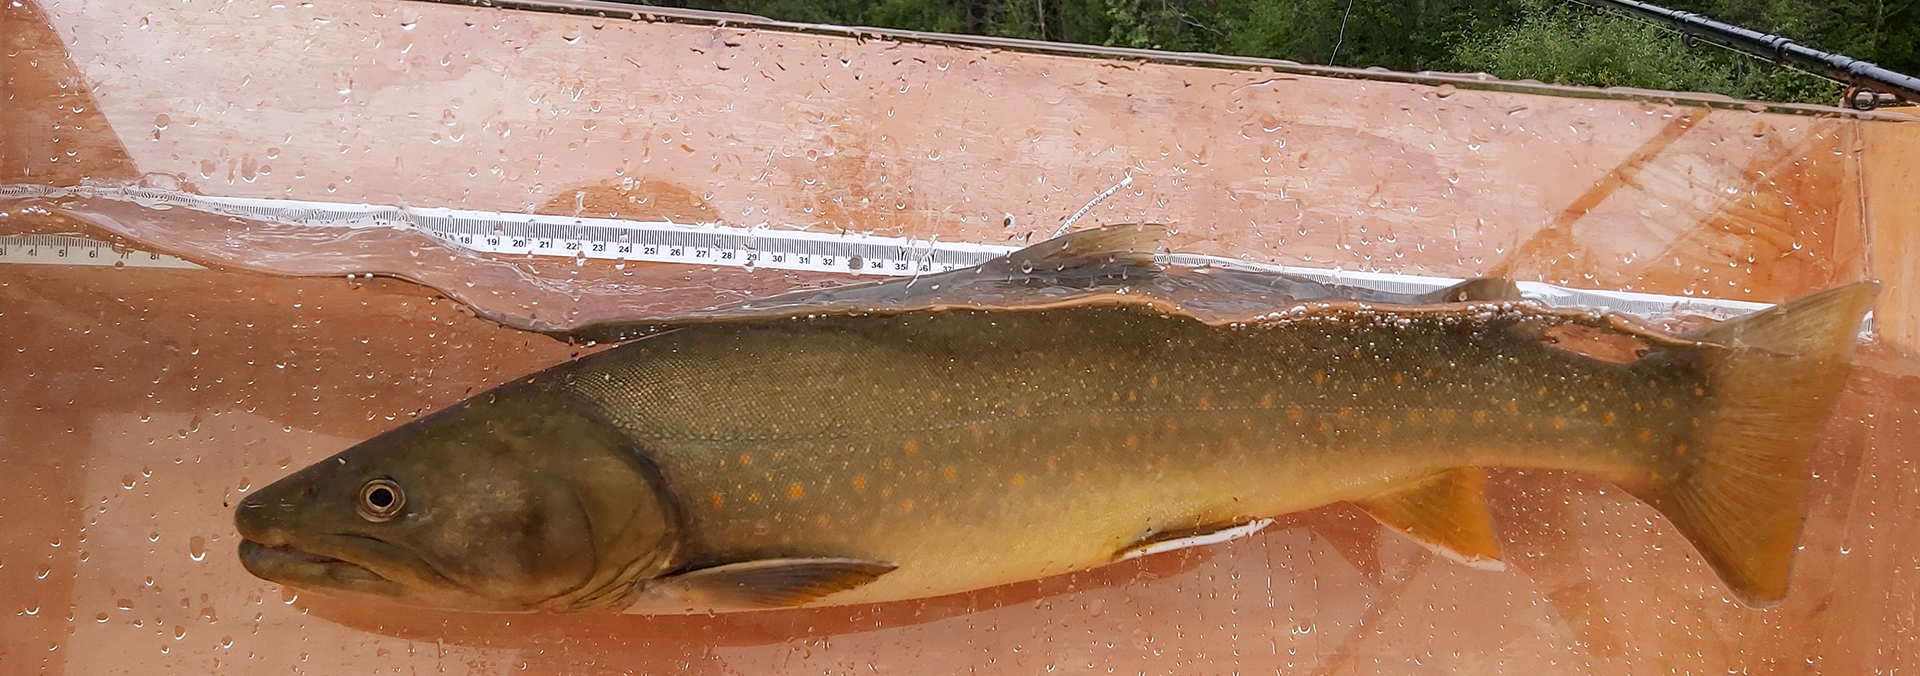 Bull Trout of the Skeena Region: Multi-Year Monitoring to Improve Fisheries Management